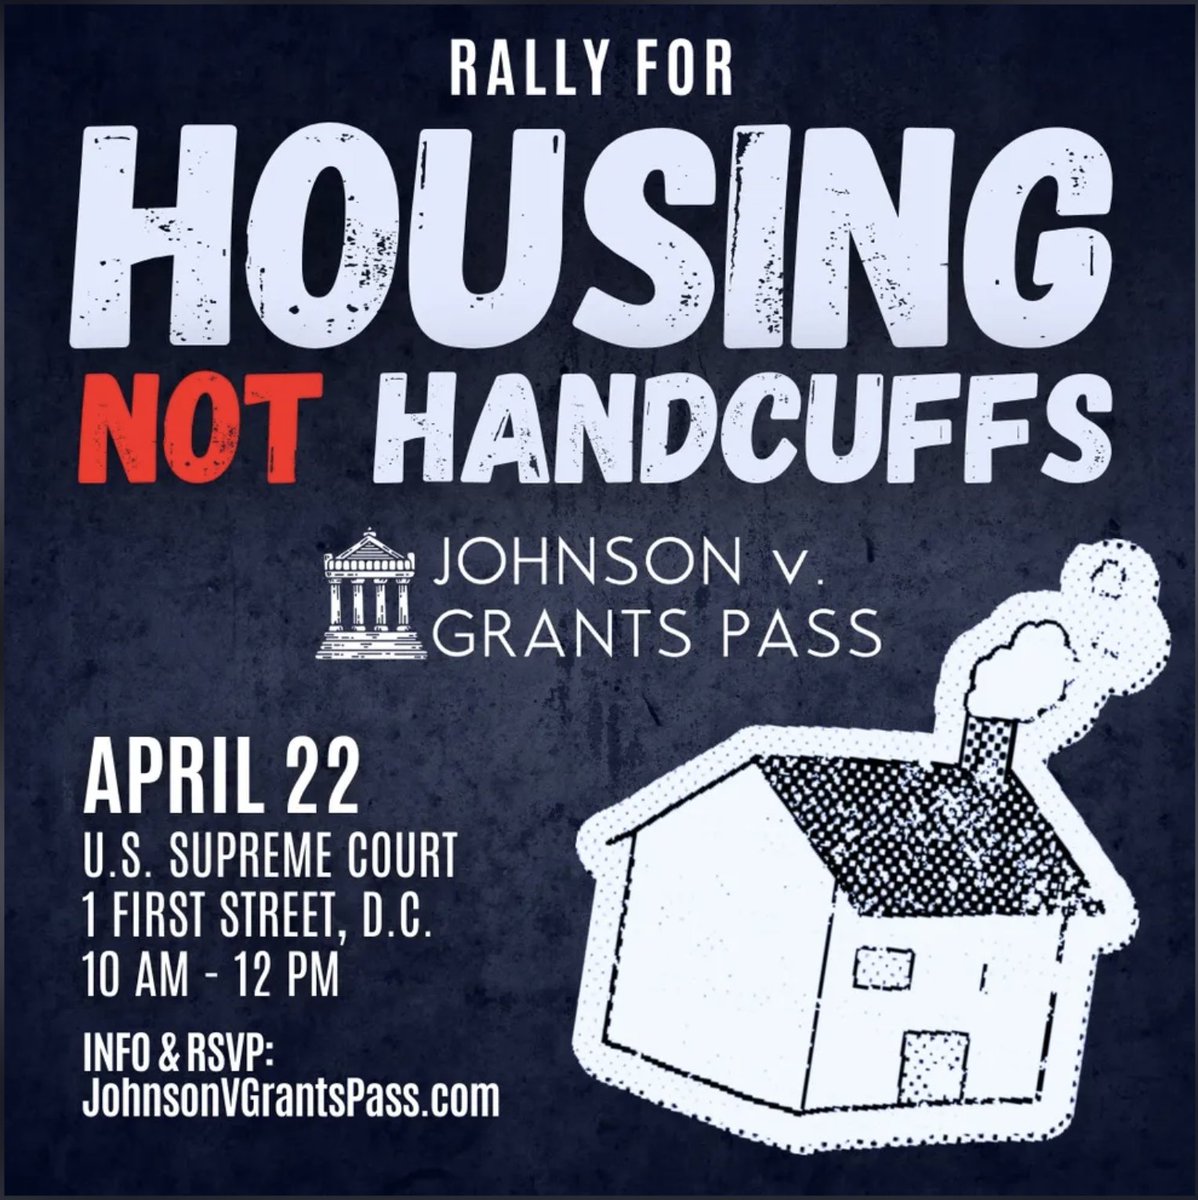 📅 Date: April 22 🕑 Time: 10 AM - 12 PM ET 📍 Location: U.S. Supreme Court, 1 First Street NE, D.C. 🔗RSVP to the rally johnsonvgrantspass.com. Let’s fill the streets with hope and demand action. See YOU at the rally! #JohnsonVGrantsPass #Homeless #EndHomelessness